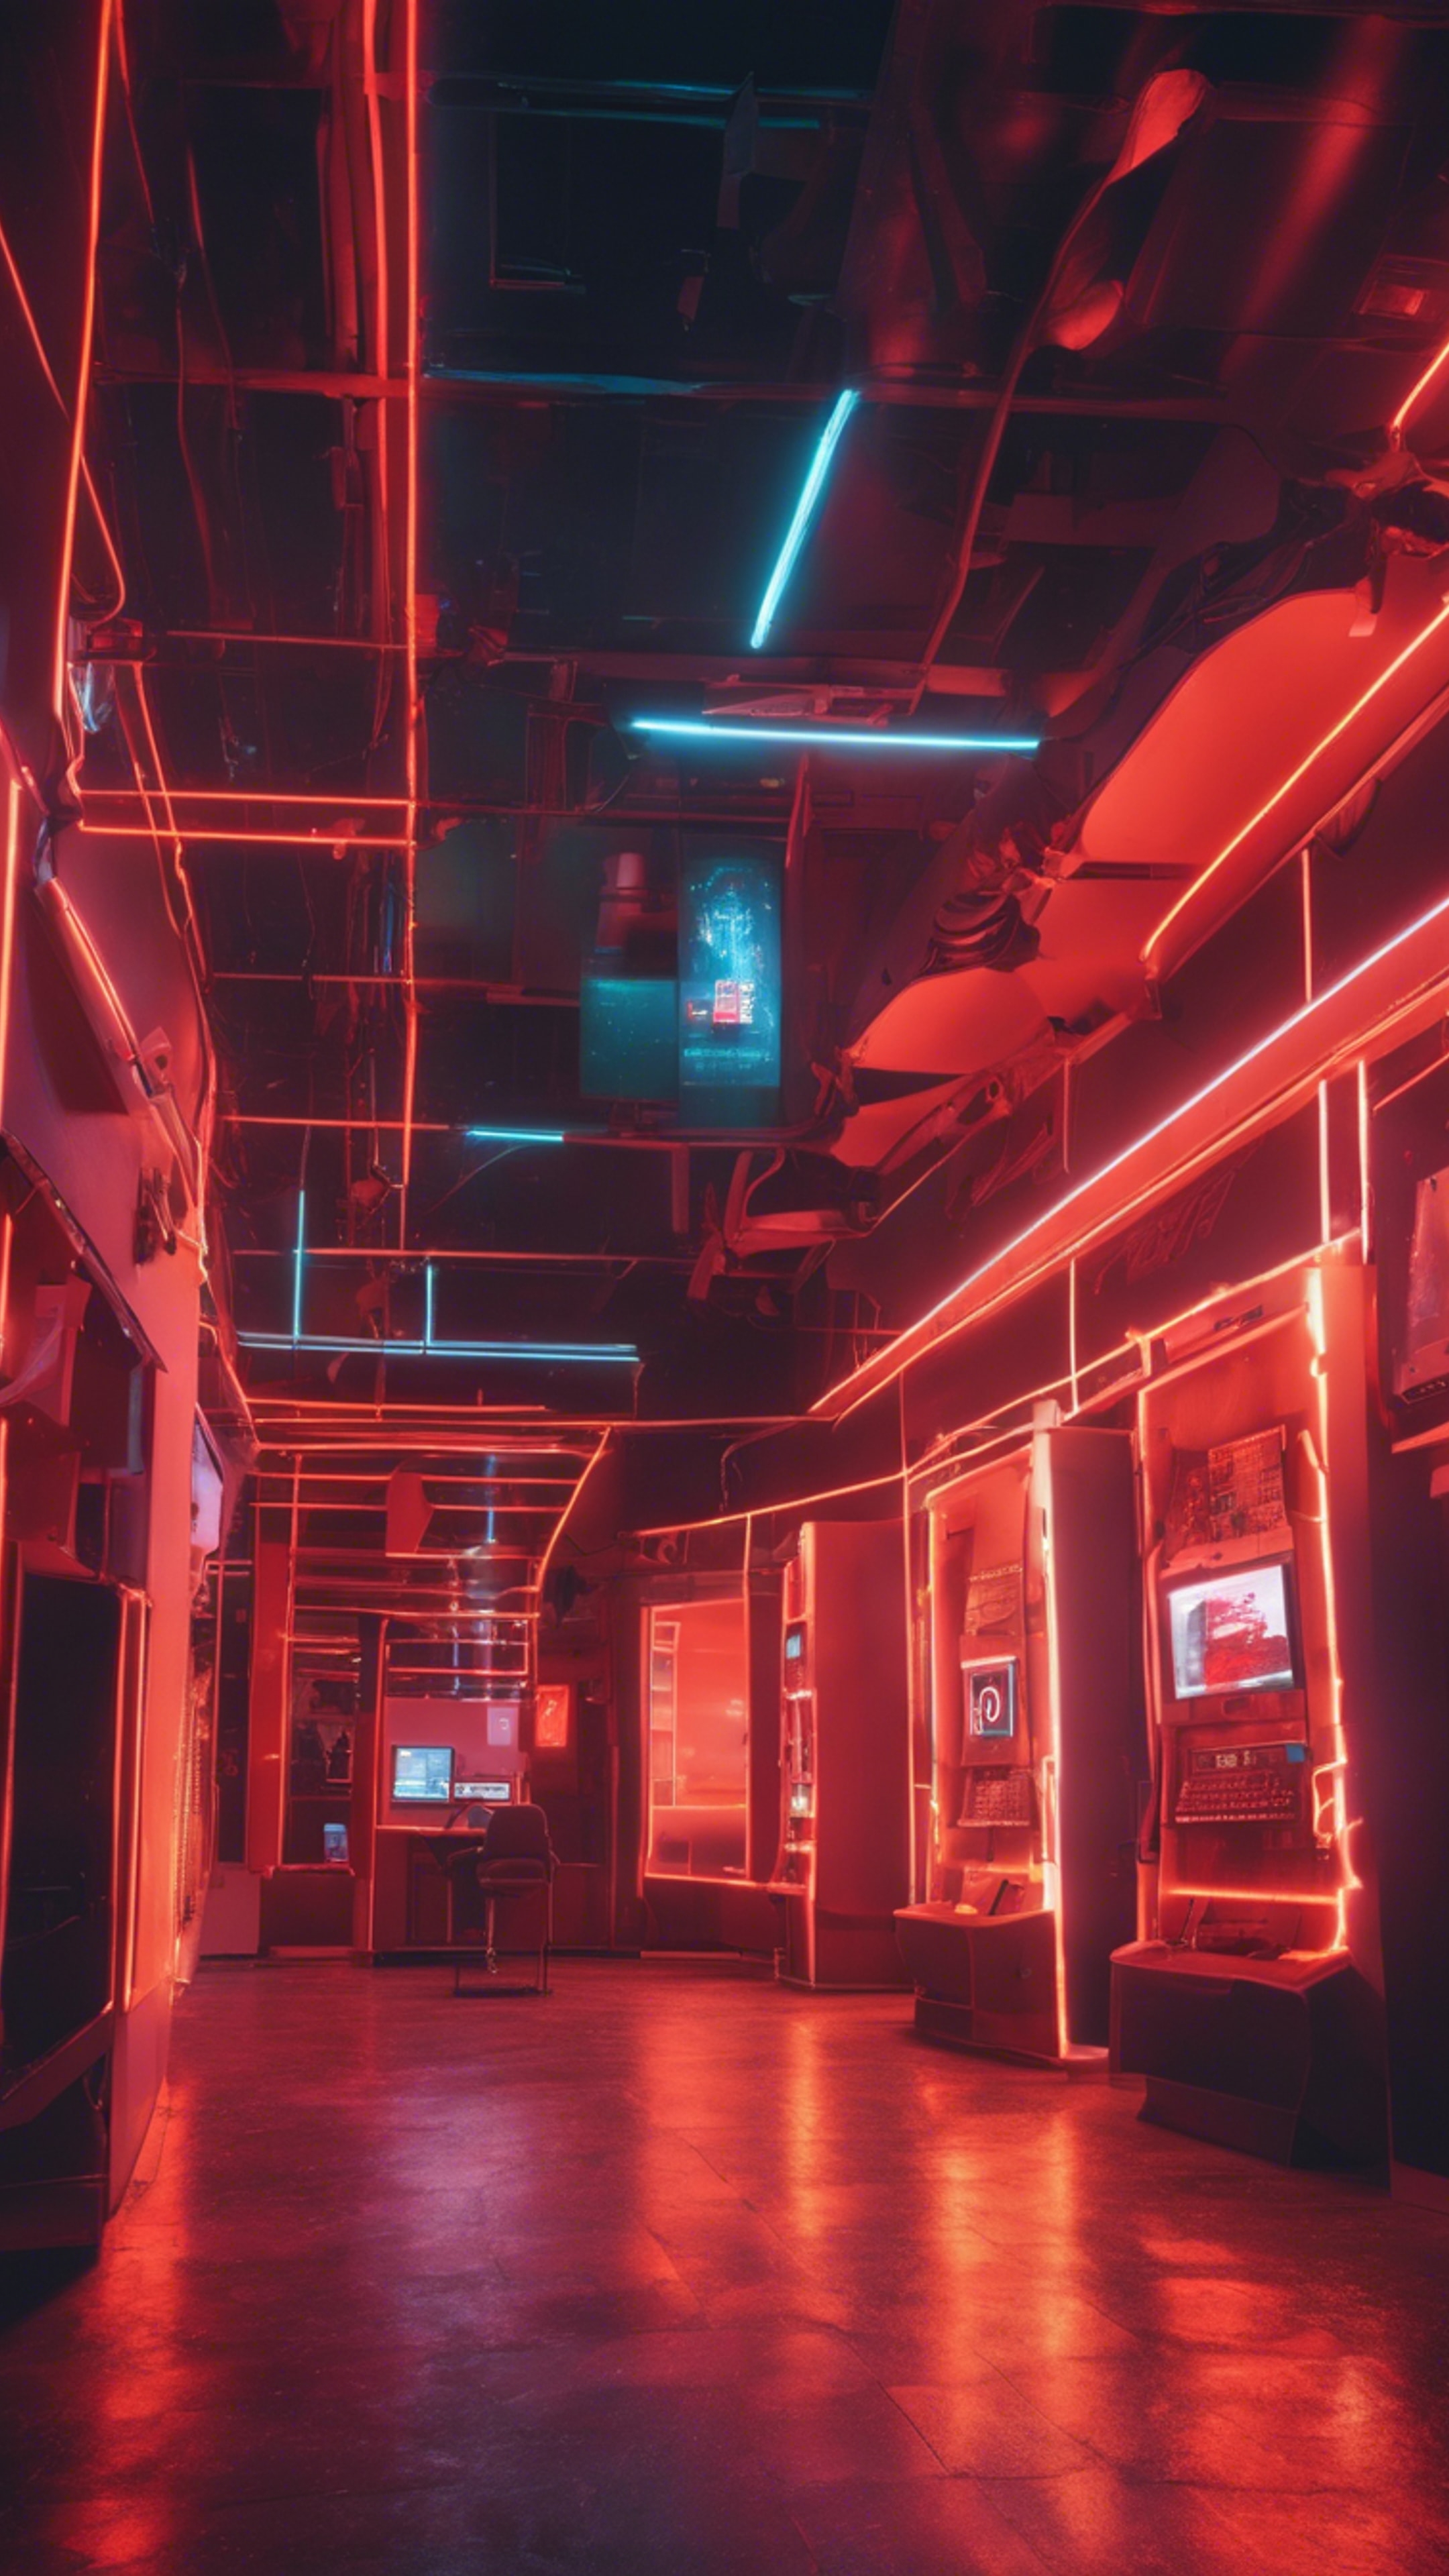 An architecturally unique cyber cafe glowing with neon red and orange lights at night. Tapeet[37c23e18da0f466d9ff8]